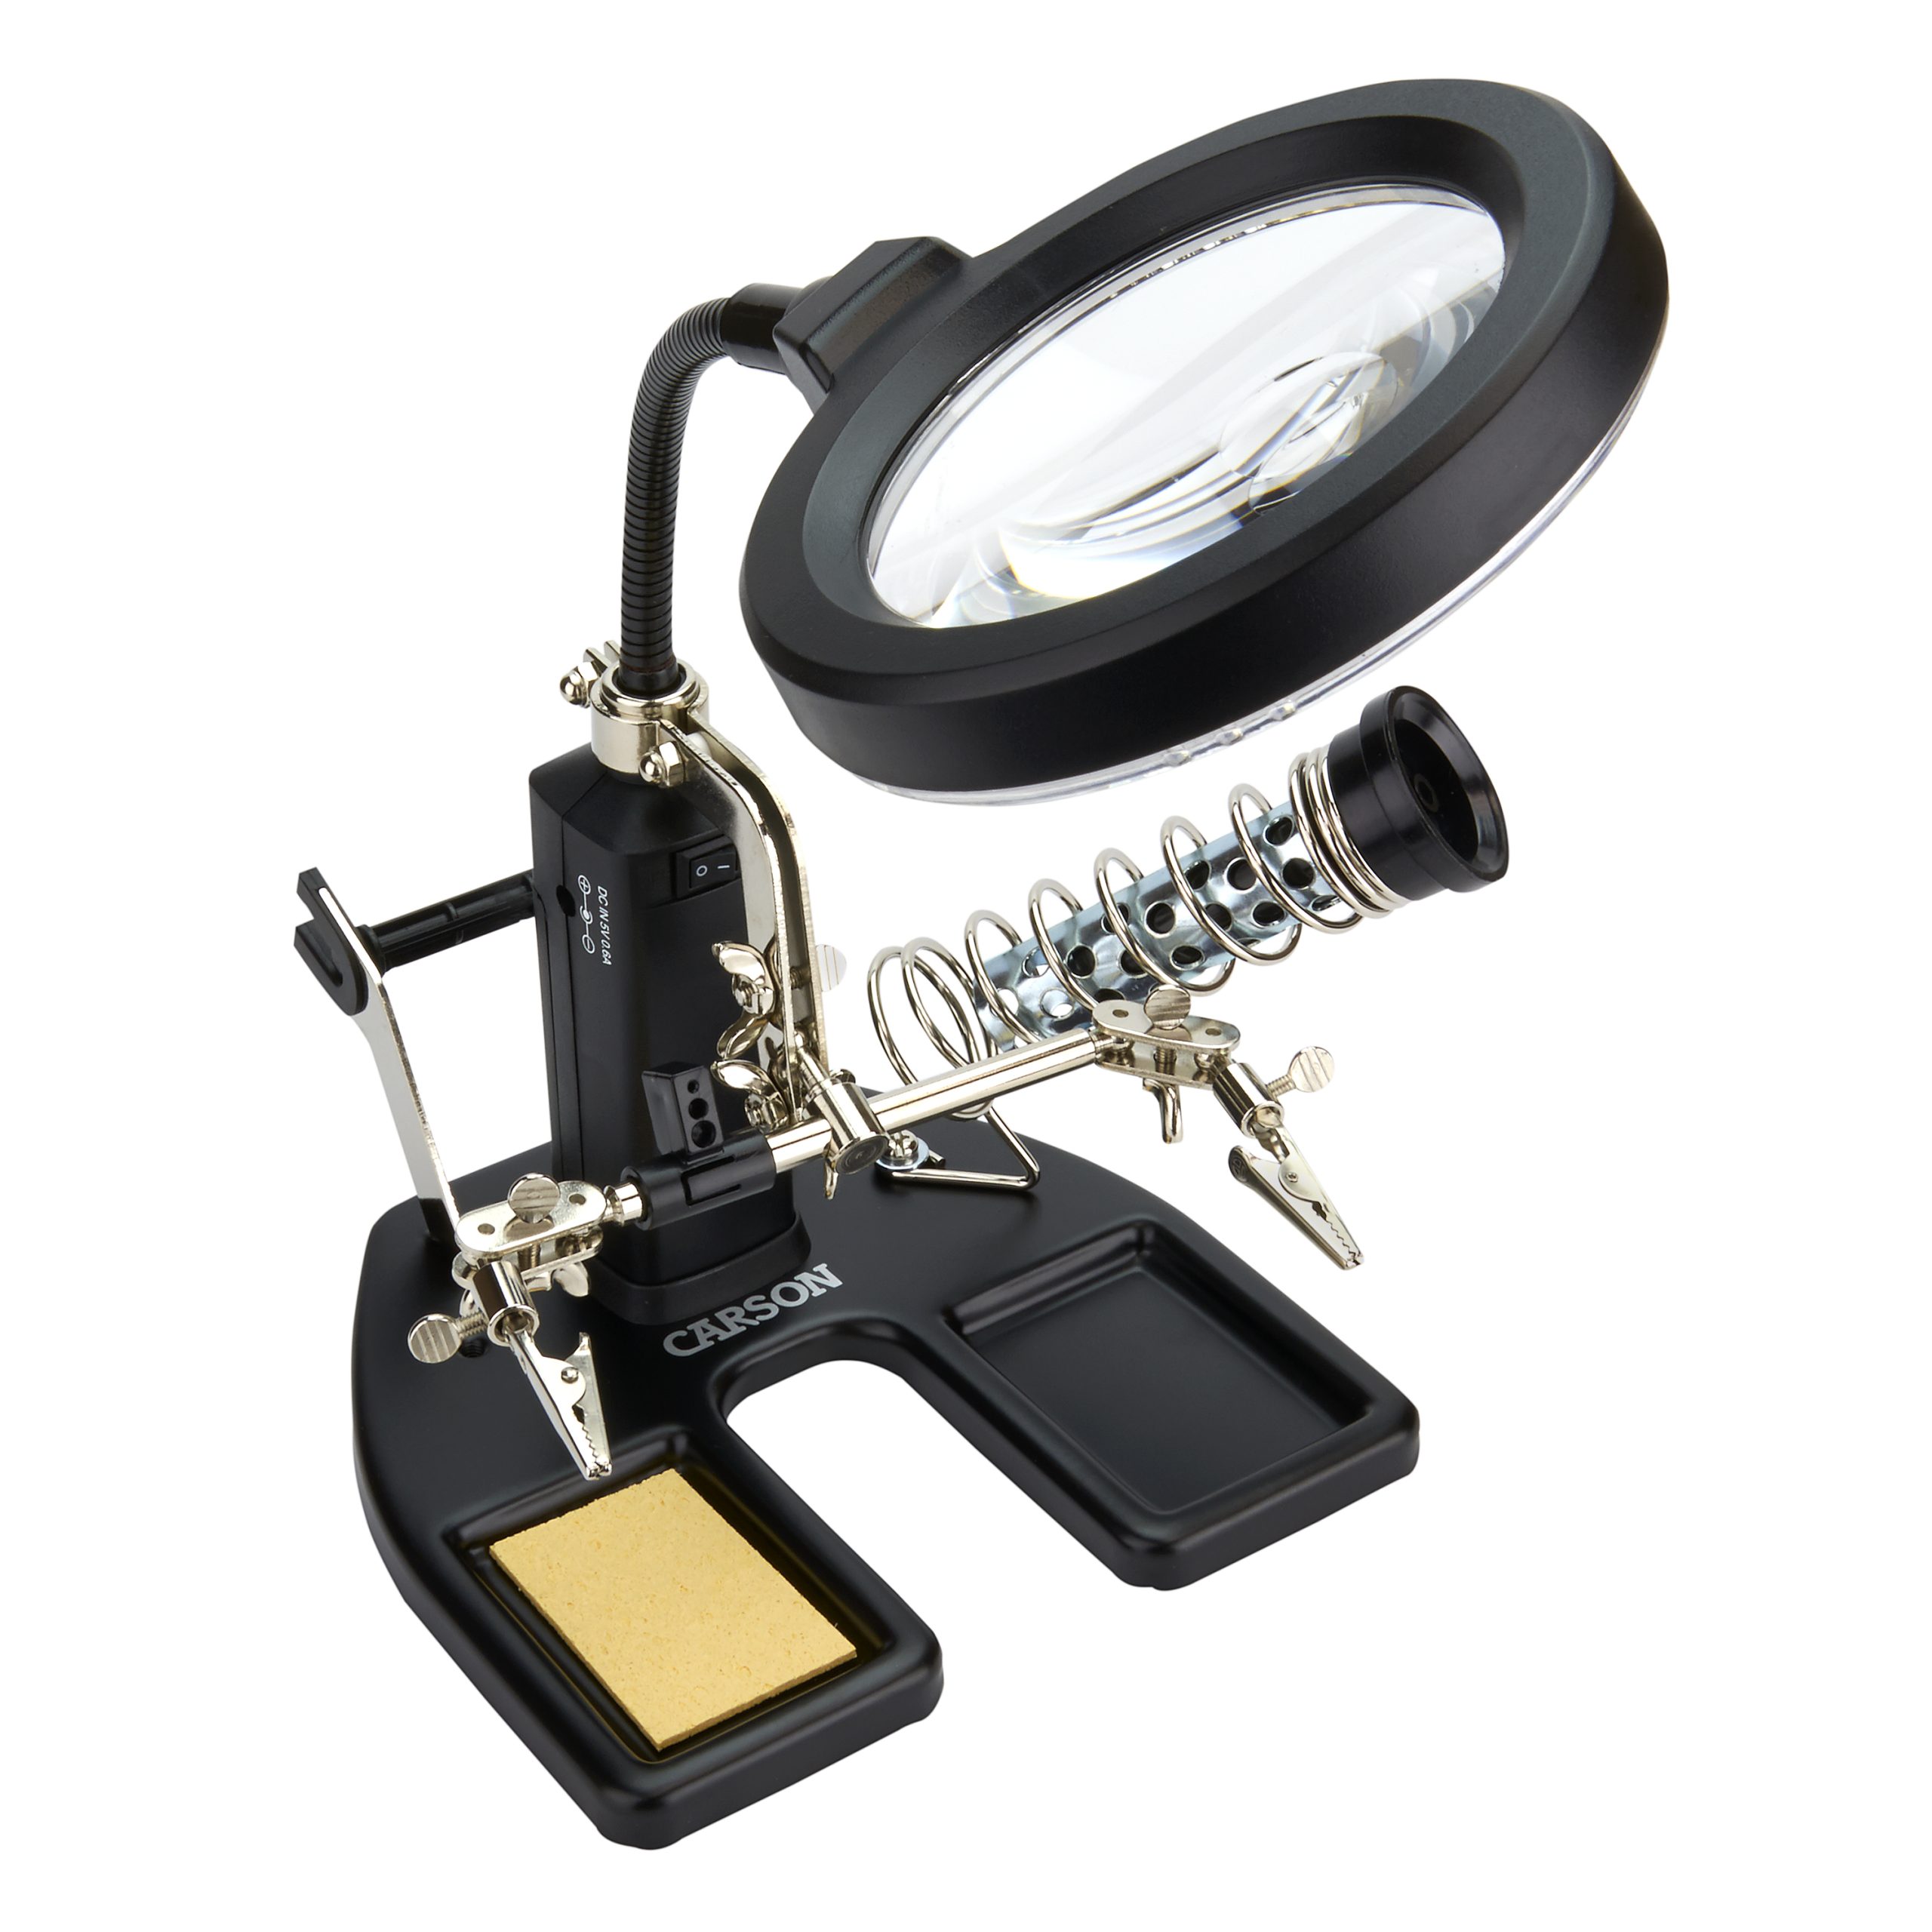 SolderMag 1.75x Power LED Lit Soldering Magnifier with 4.5x Spot